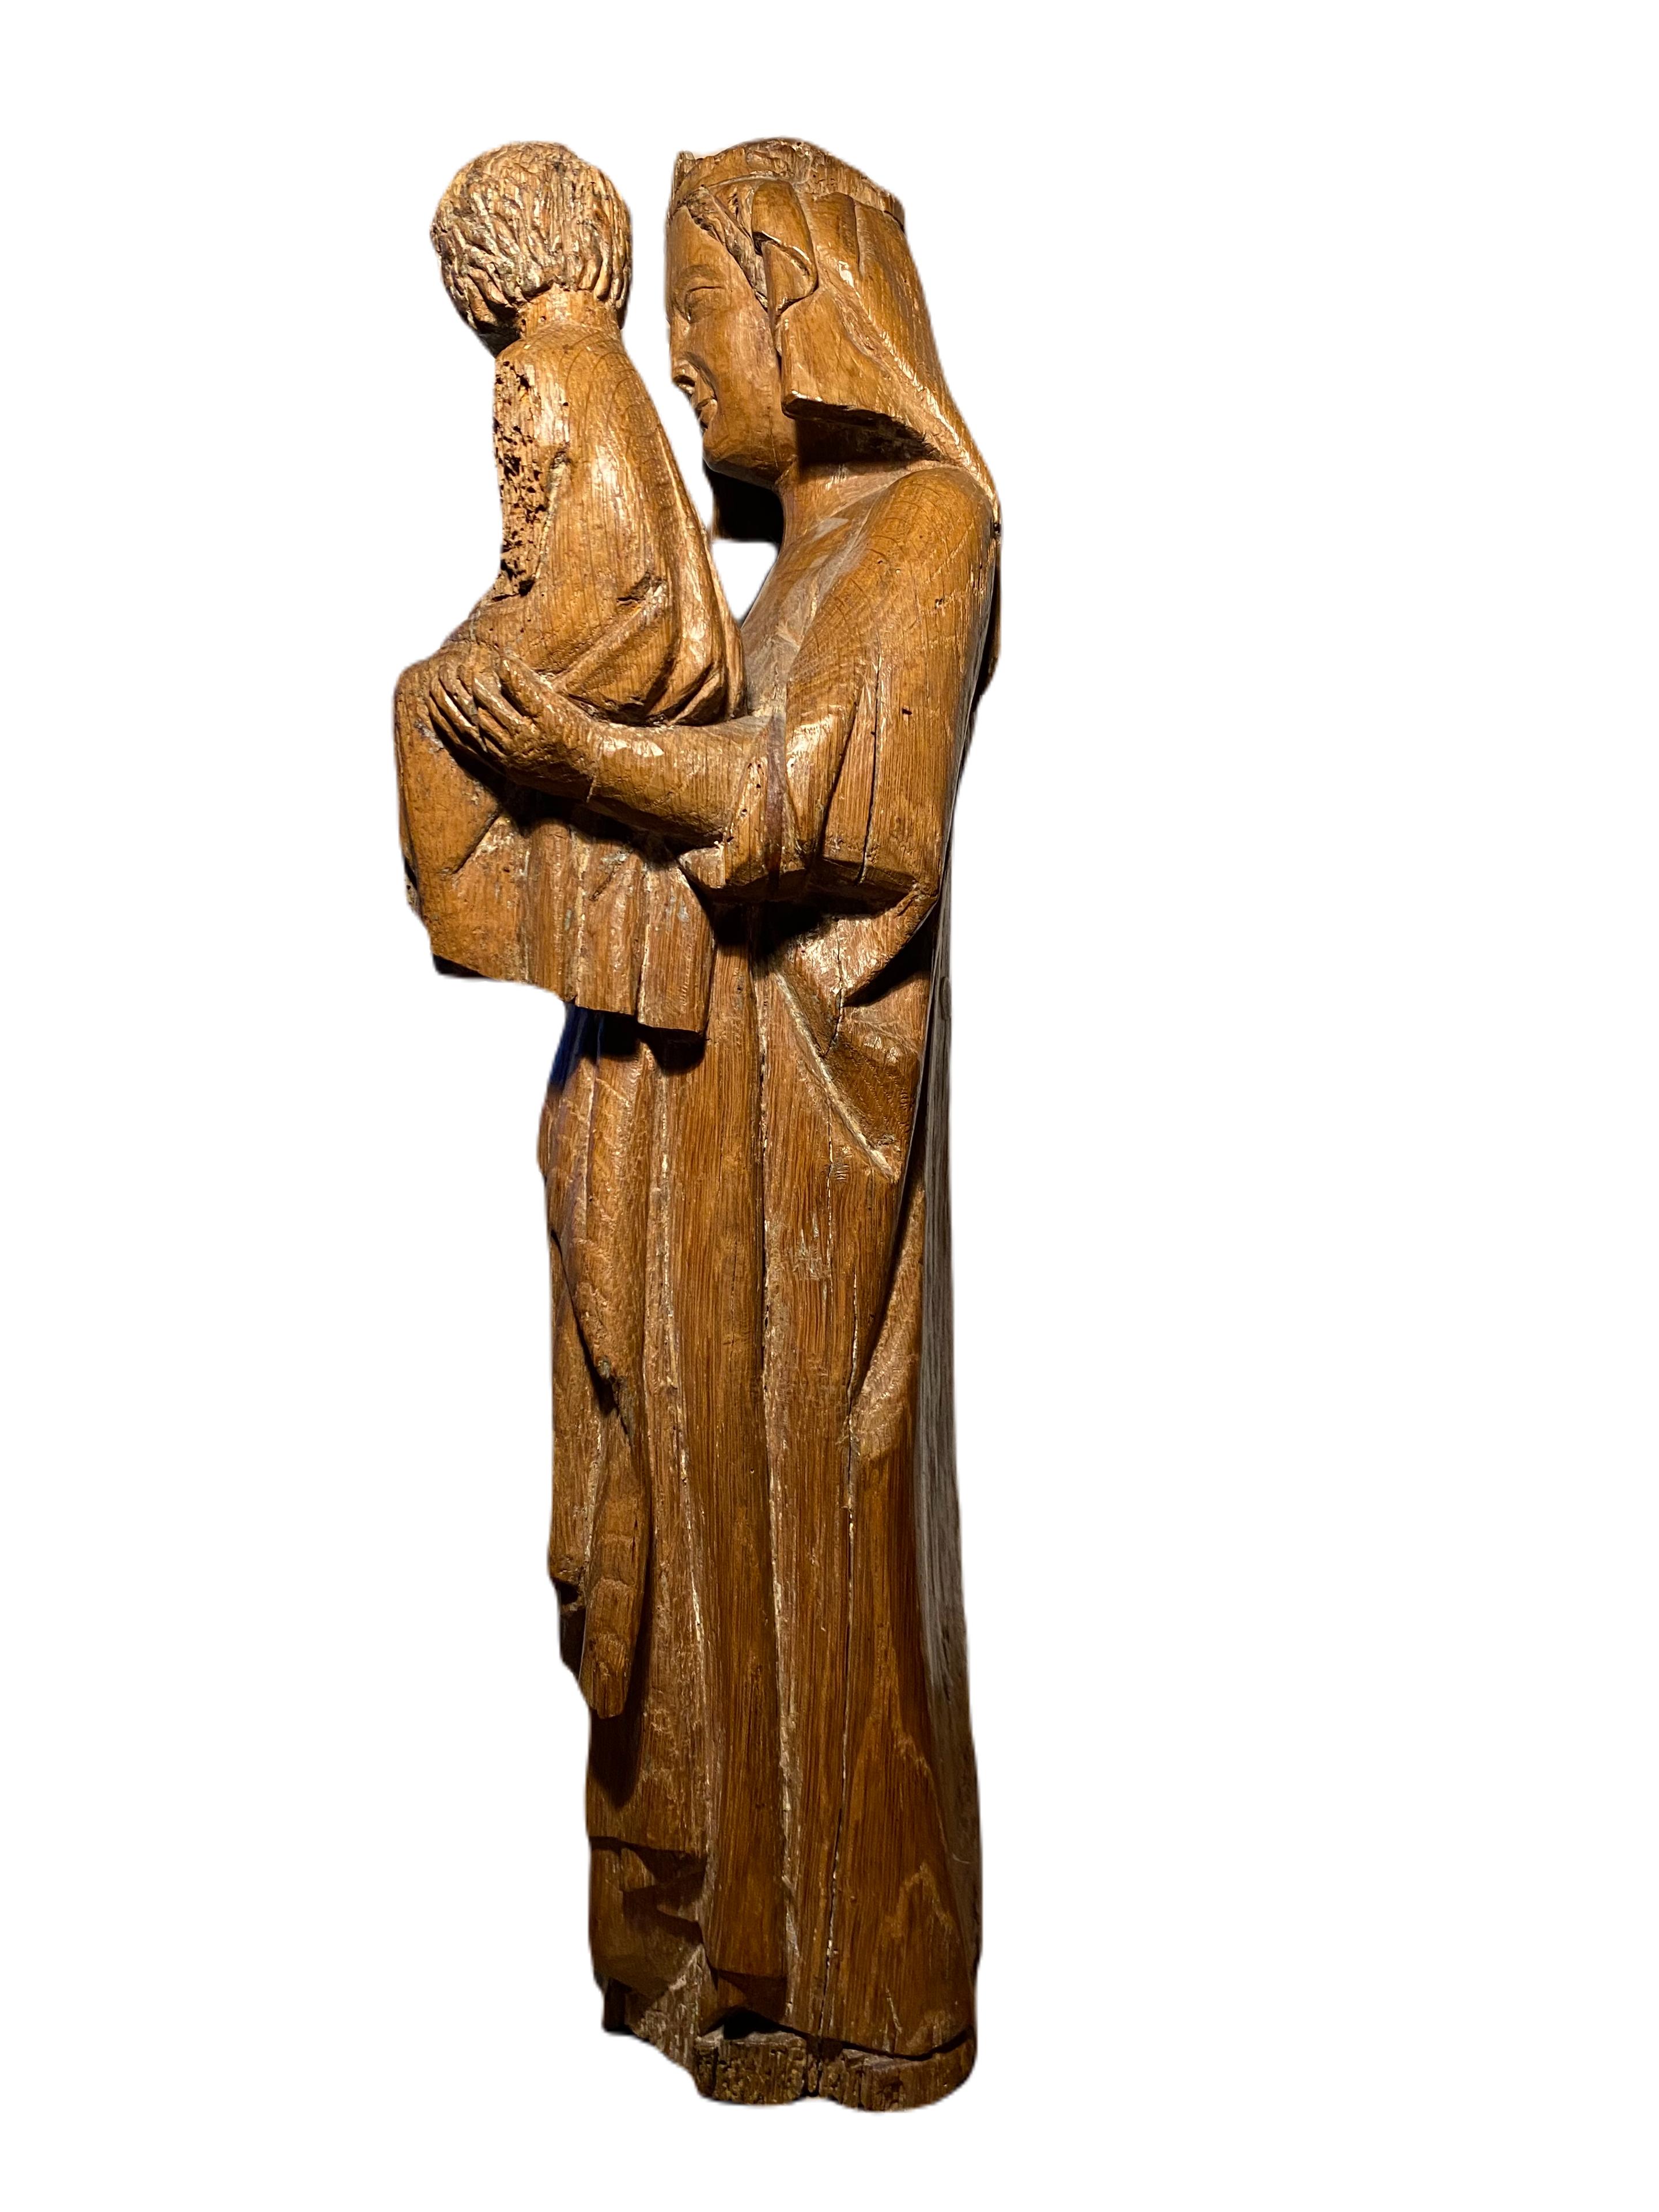 Madonna and Child. 14th century Parisian workshops. - Sculpture by Unknown